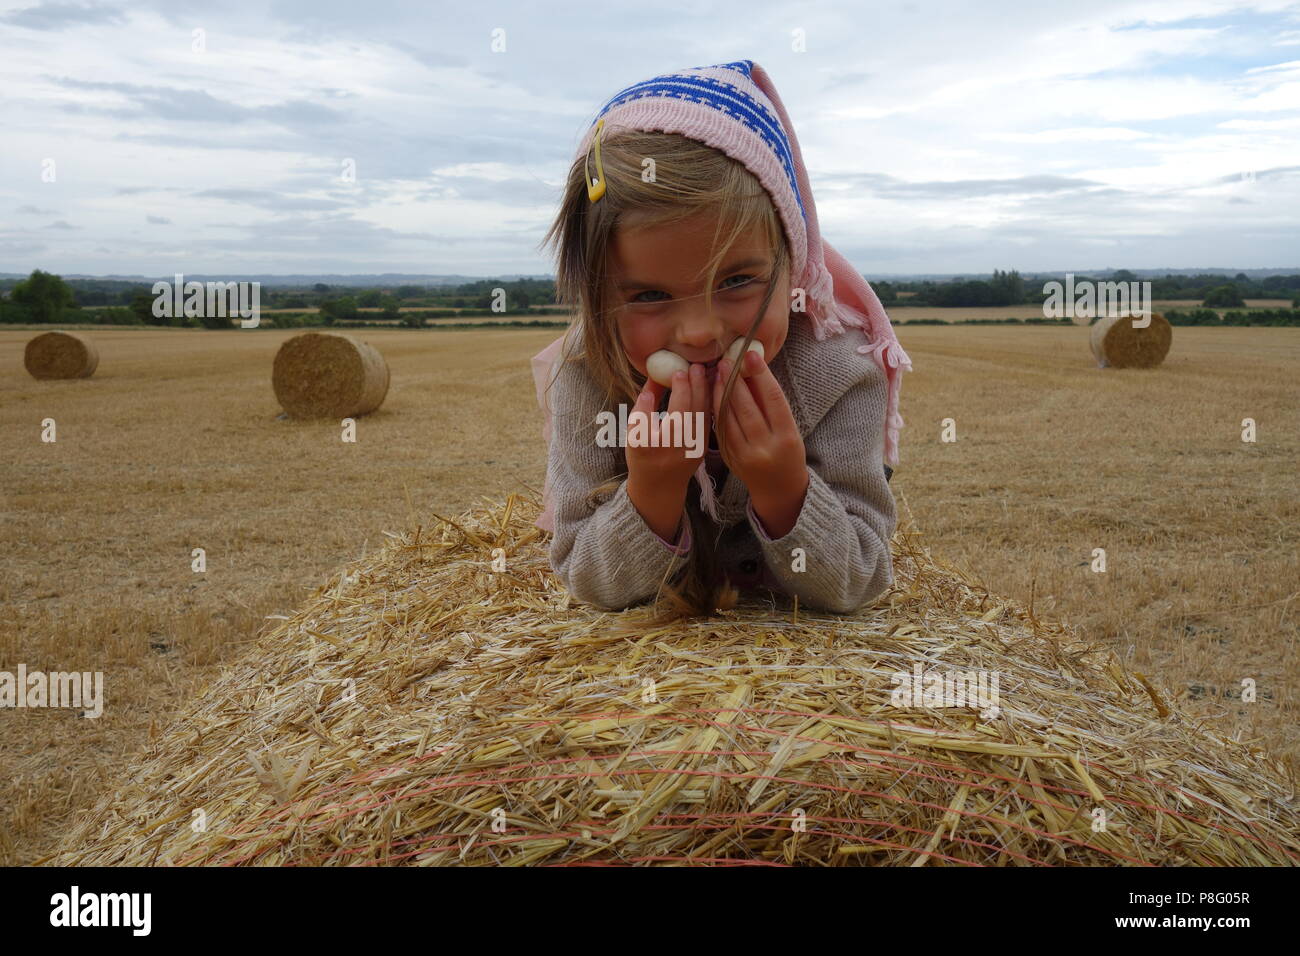 Beautiful girl in pink headscarf on straw bale in summer field at harvest time Stock Photo